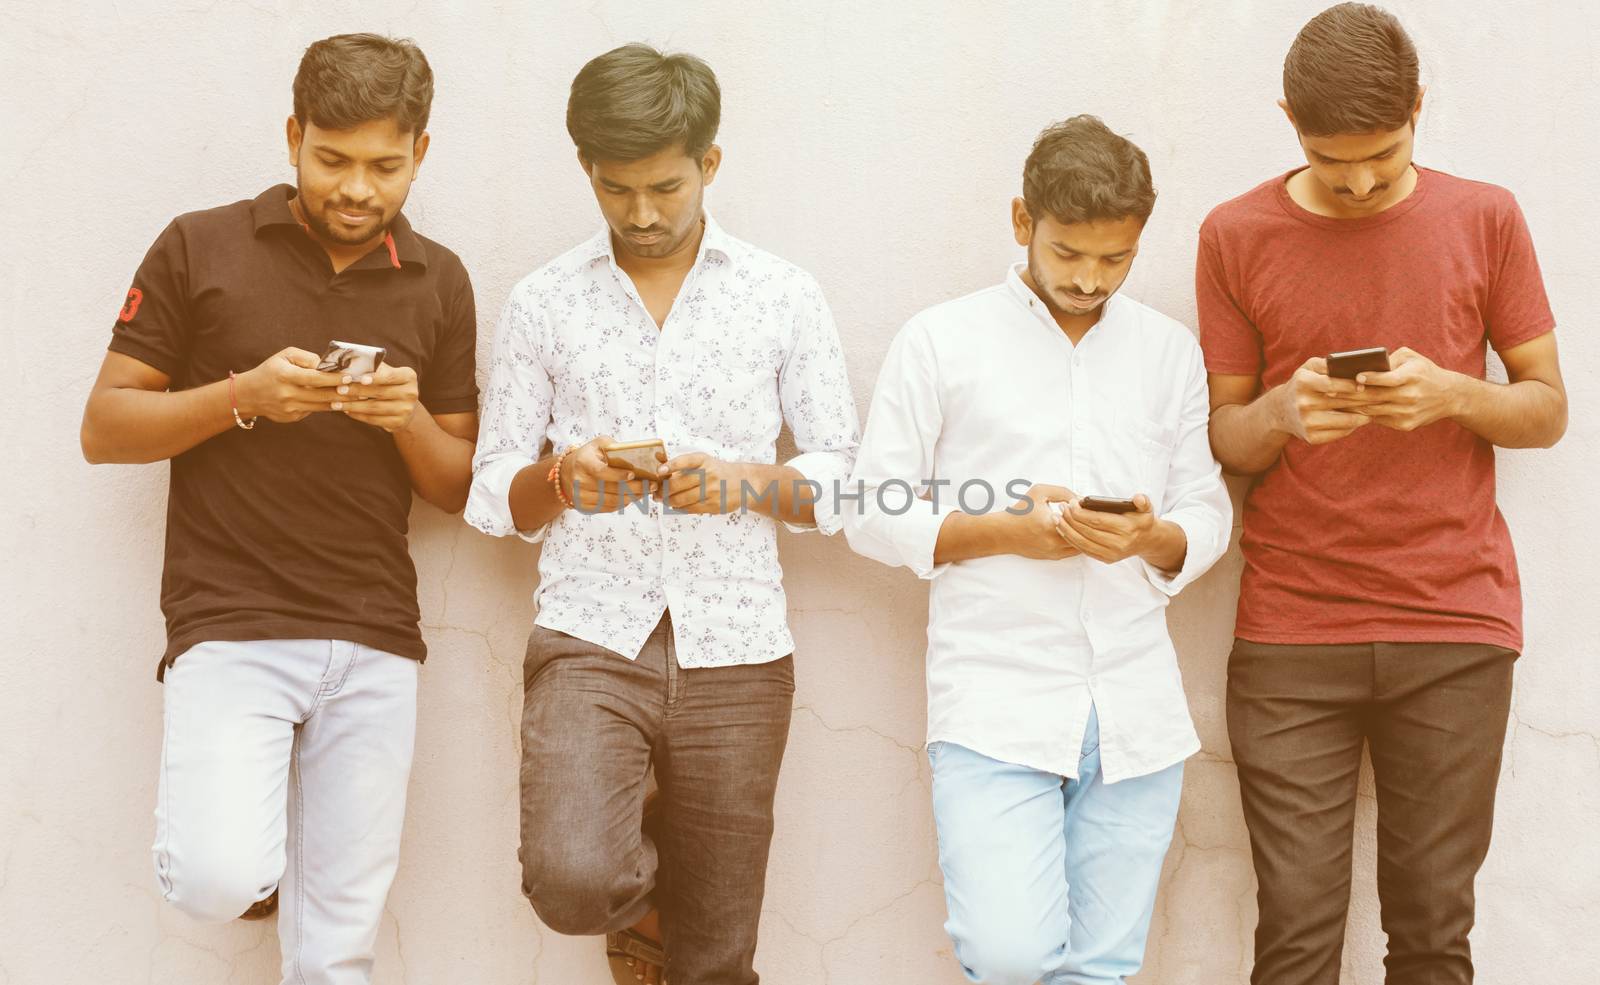 Young people with heads down busy on smart phone - Friends group using smartphone againt wall at backyard - Concept of millennials addicted and connected always to technology. by lakshmiprasad.maski@gmai.com